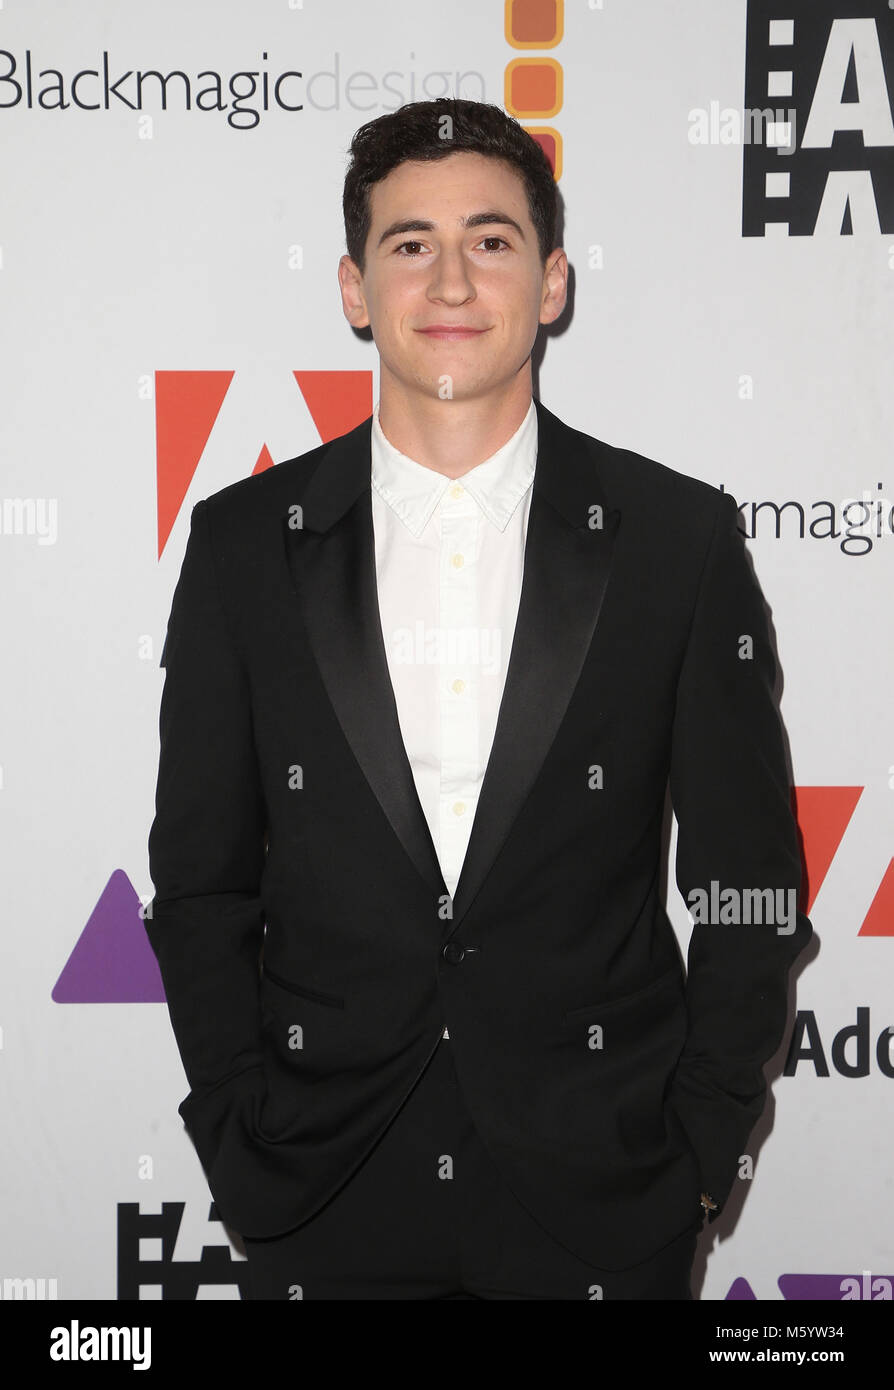 68th Annual ACE Eddie Awards - Arrivals  Featuring: Sam Lerner Where: Beverly Hills, California, United States When: 26 Jan 2018 Credit: FayesVision/WENN.com Stock Photo